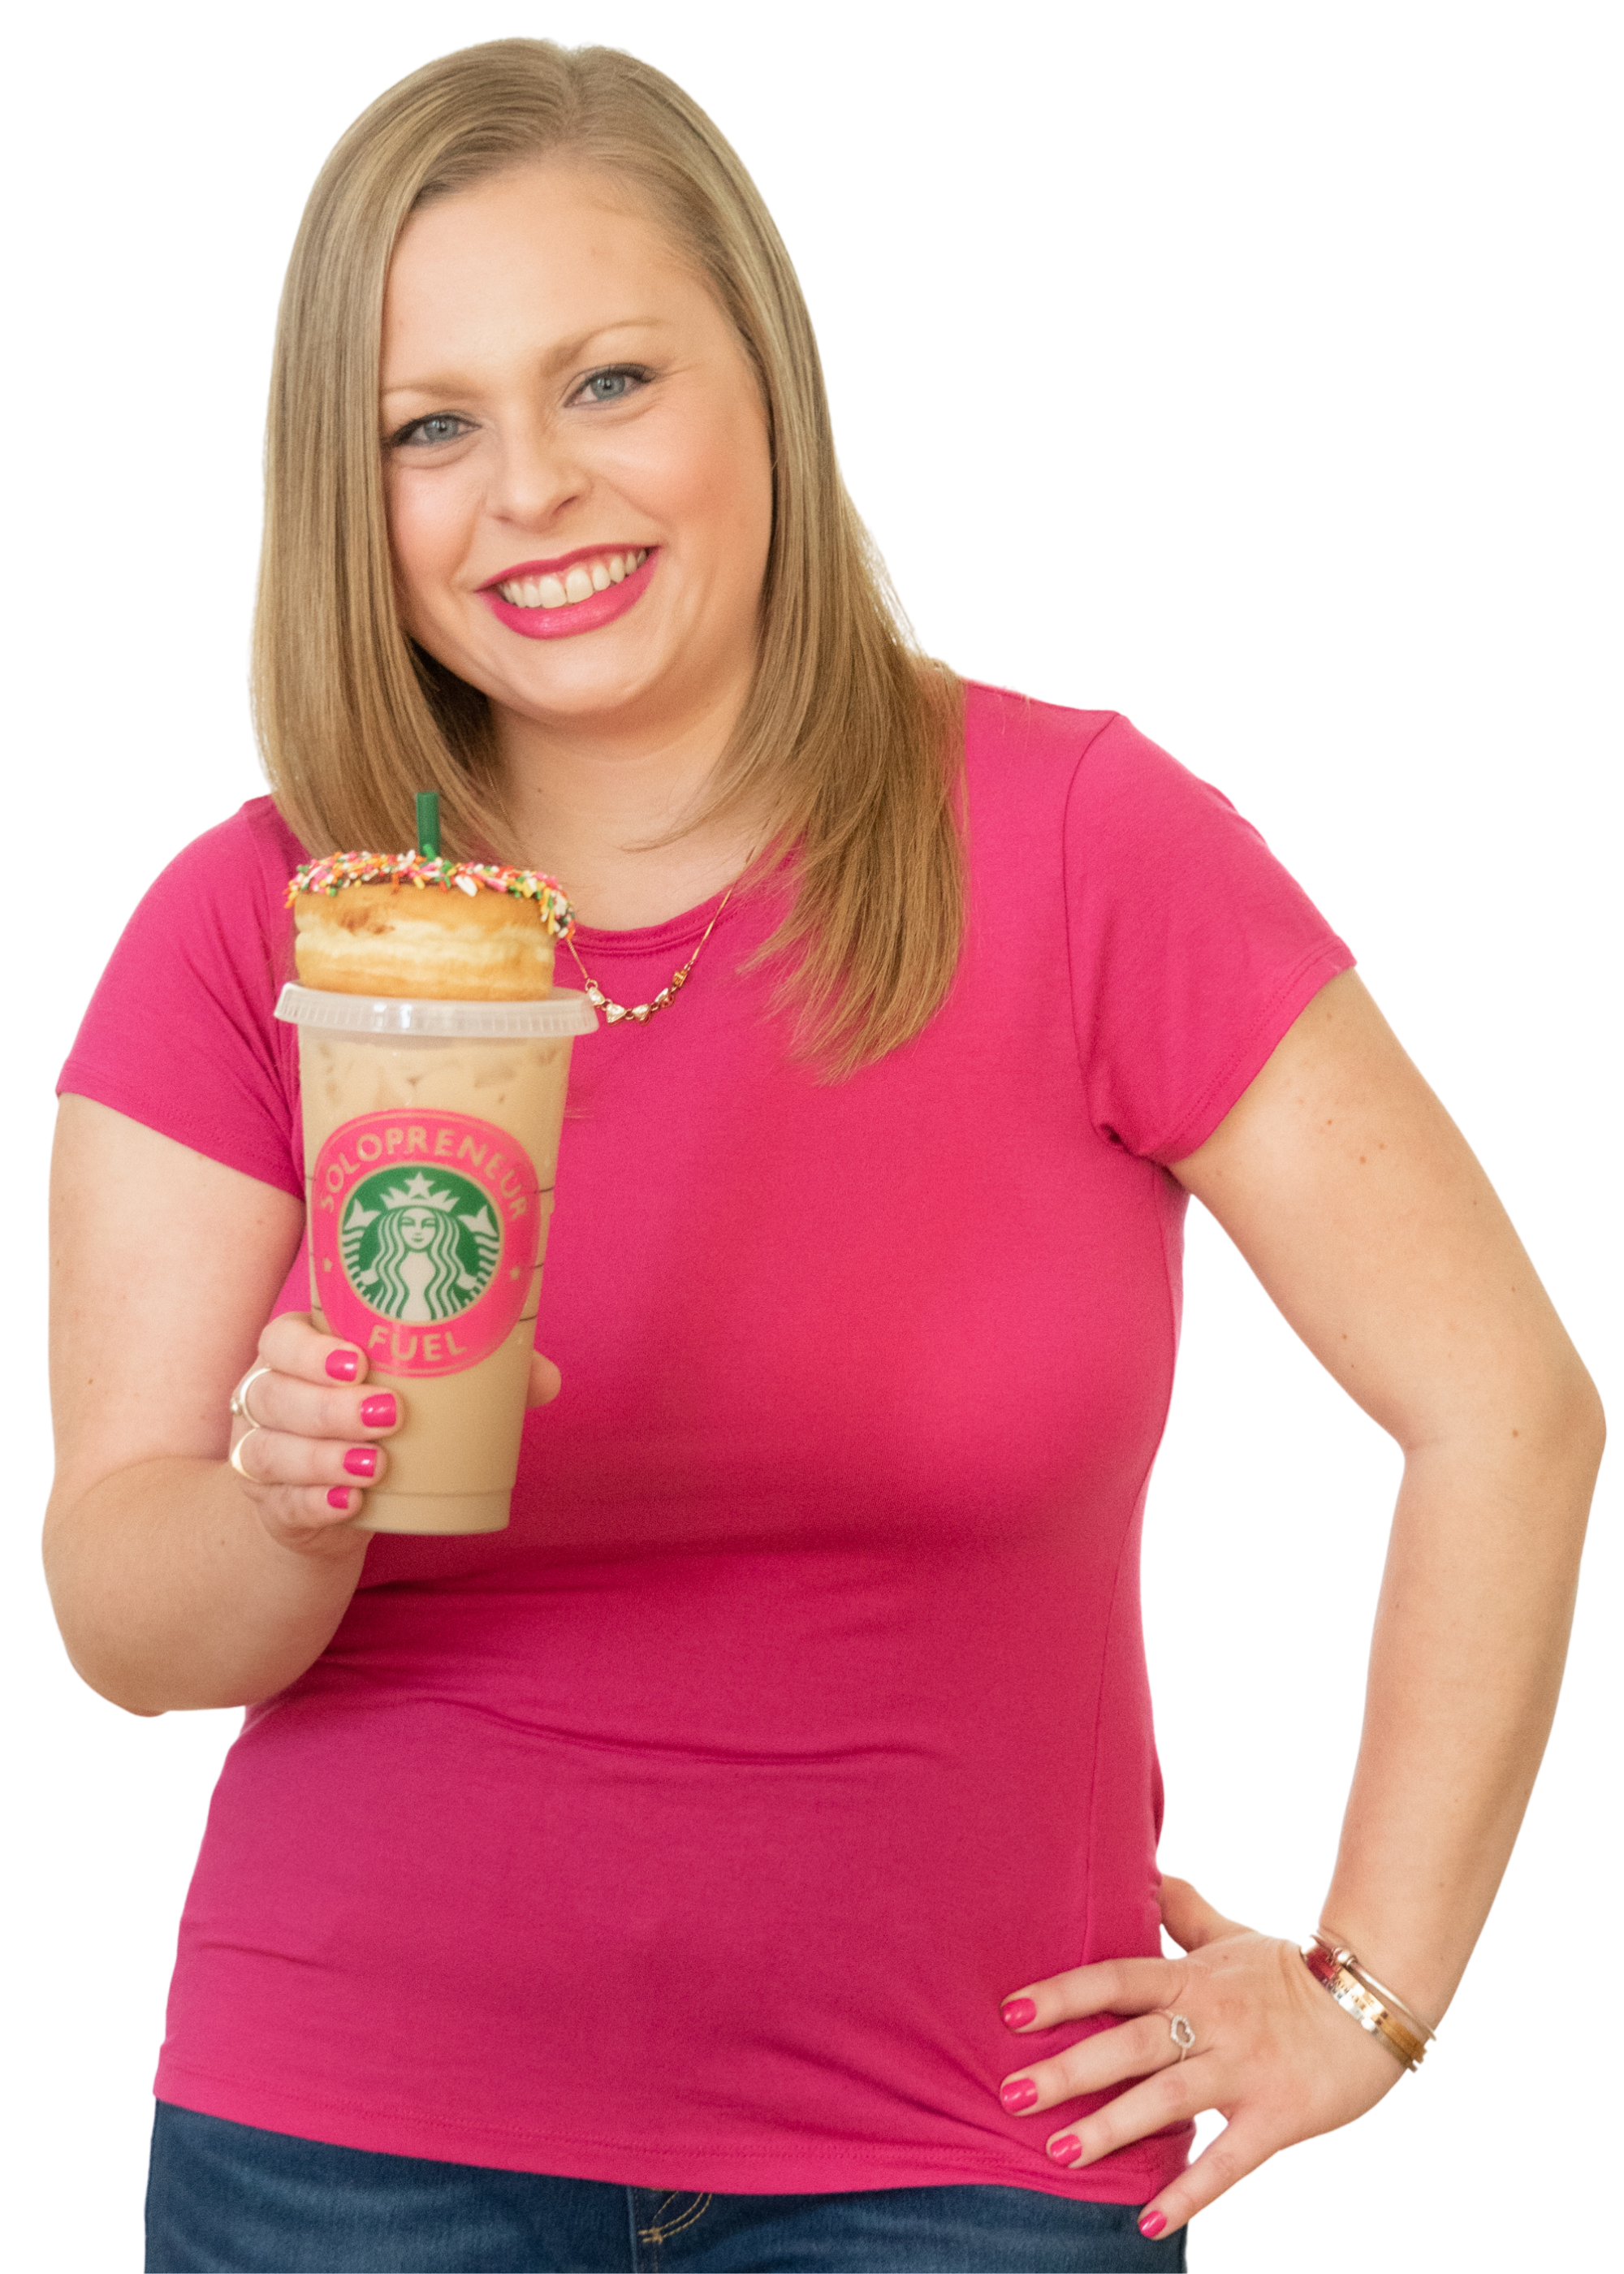 Alexandra of The Productivity Zone in a hot pink shirt holding a custom Starbucks cup that says solopreneur fuel. The cup is filled with iced coffee and has a sprinkle doughnut perched on top.